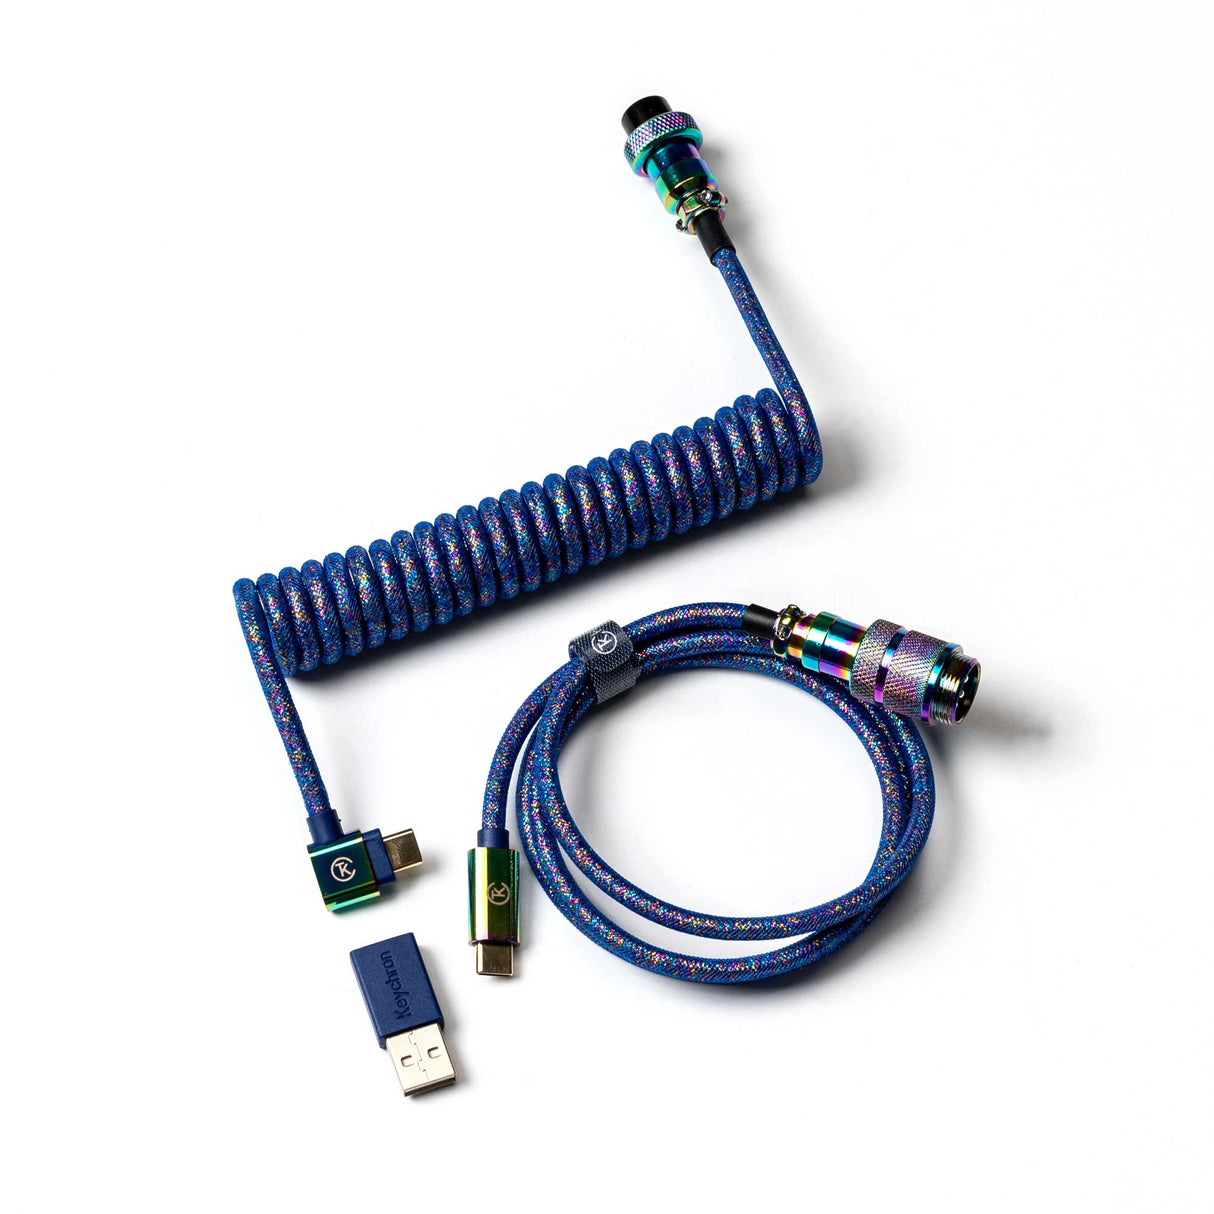 Keychron Premium Coiled Aviator Cable – Keychron  Mechanical Keyboards for  Mac, Windows and Android